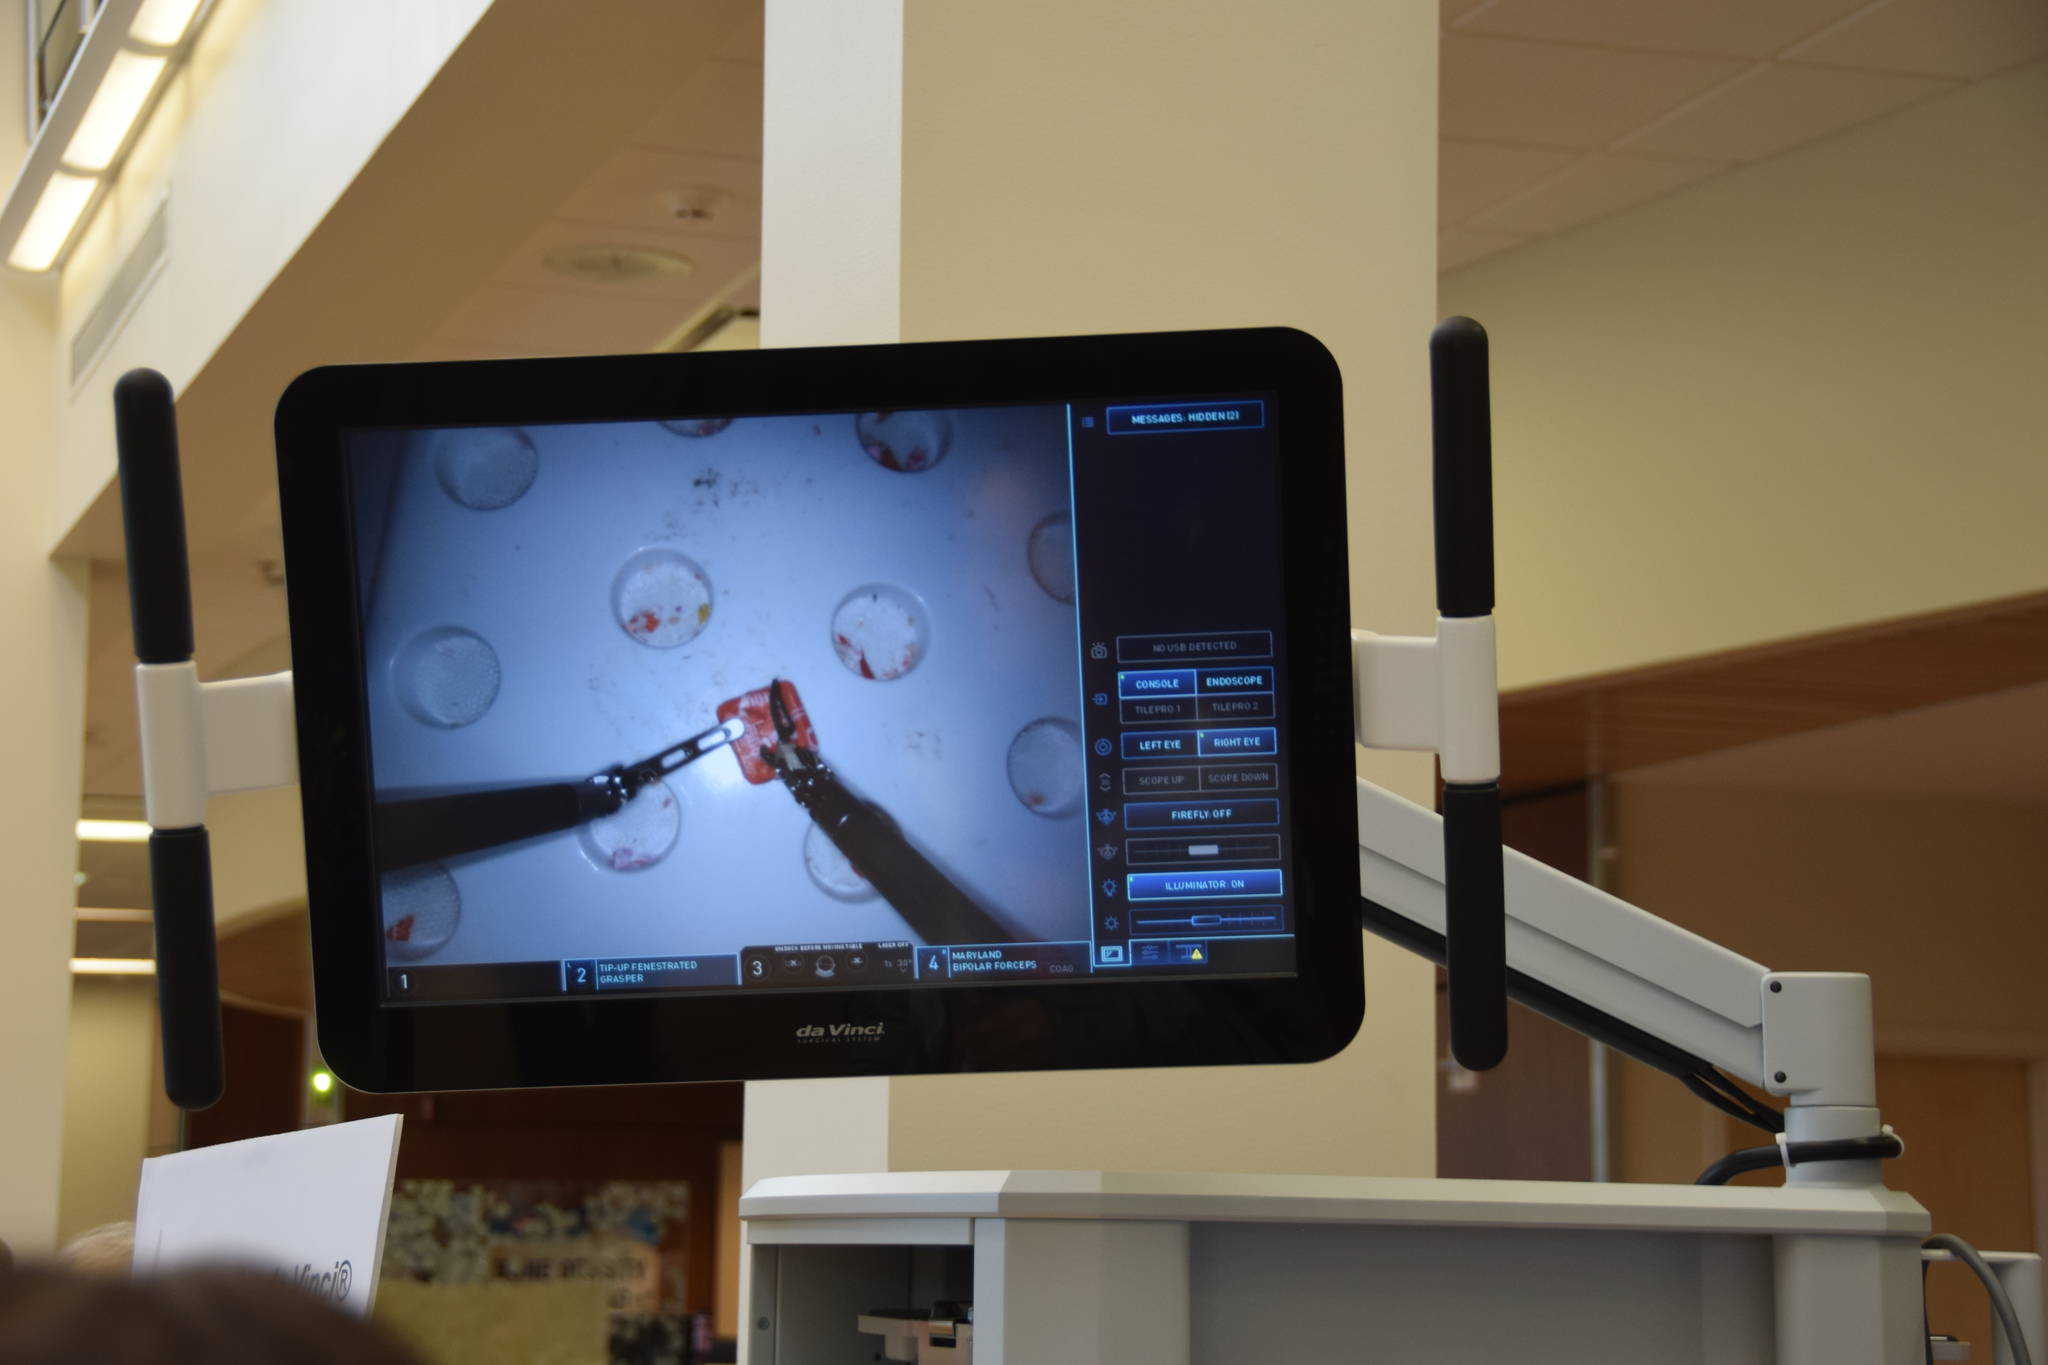 The Da Vinci Xi’s monitor shows what the surgeon sees during procedures so that others can follow along, as seen during the Community Health Fair at Central Peninsula Hospital in Soldotna, Alaska, on March 23, 2019. (Photo by Brian Mazurek/Peninsula Clarion)